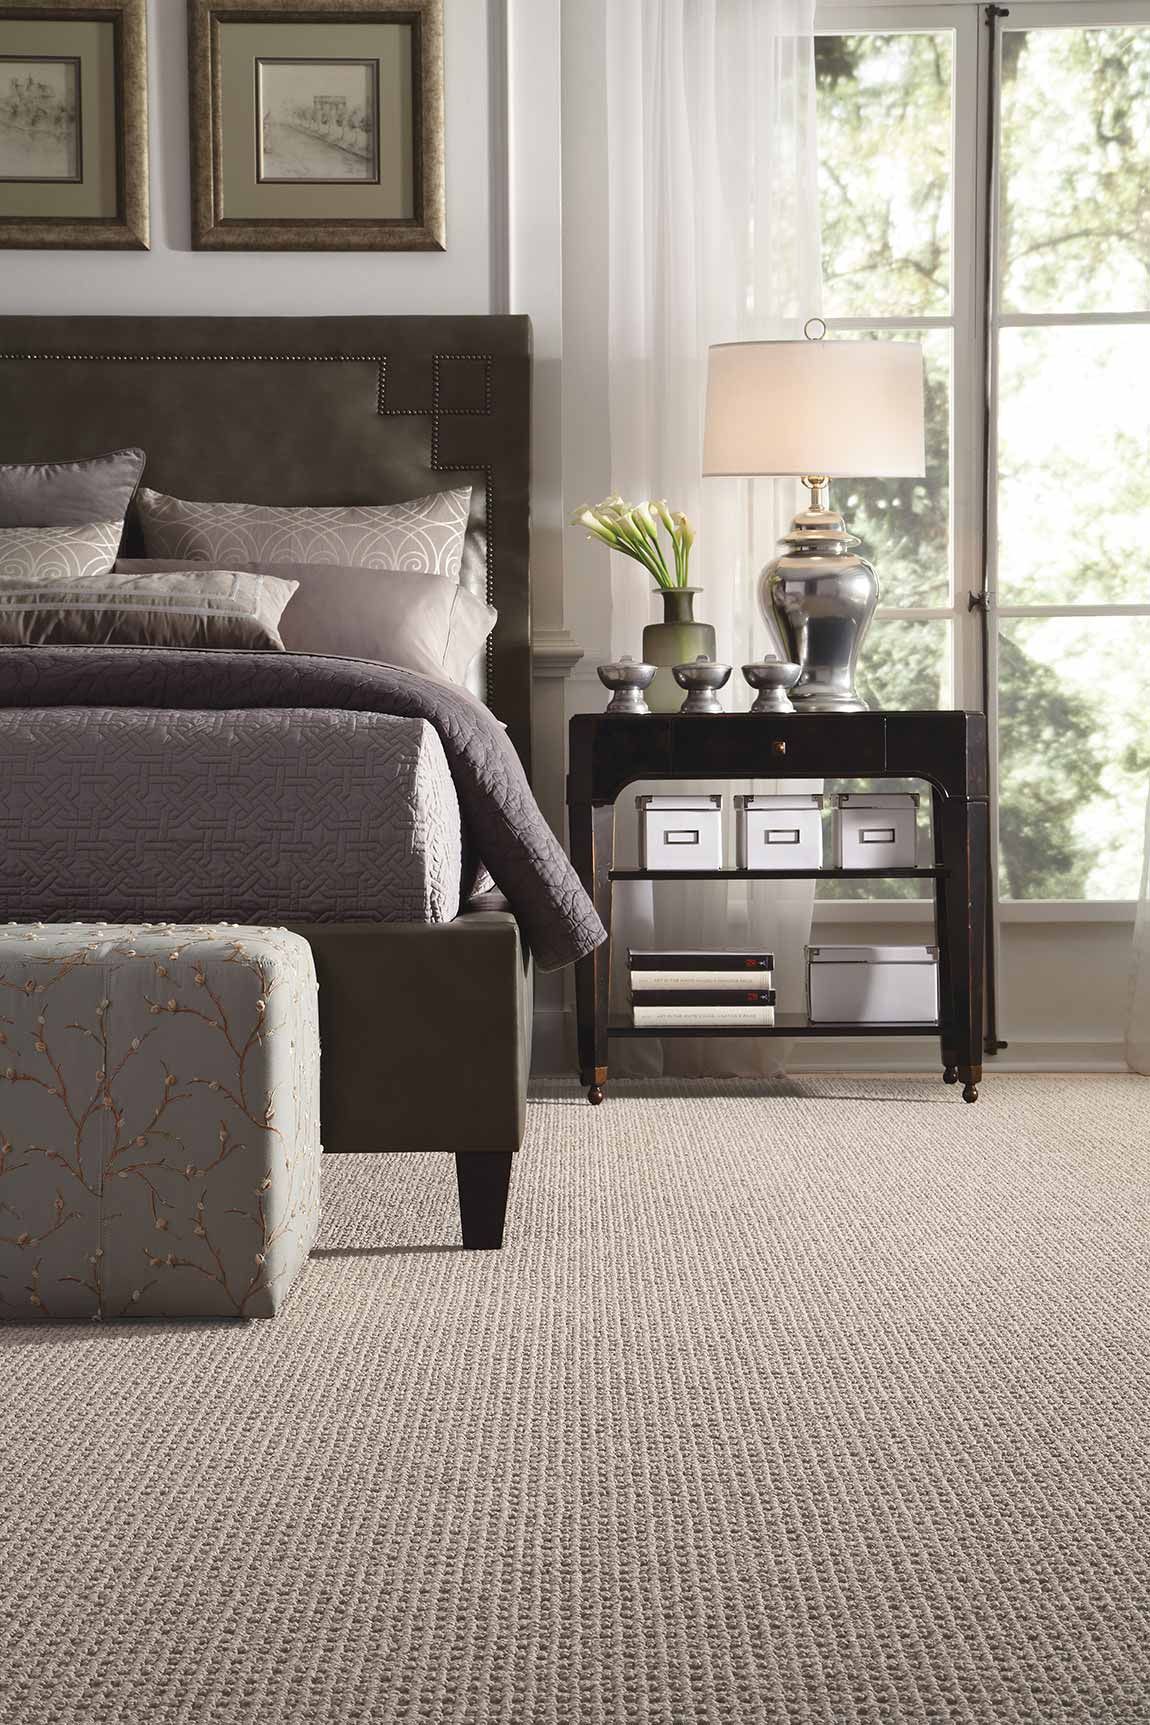 Cozy Comfort: Choosing The Perfect Bedroom Rug For Your Sanctuary